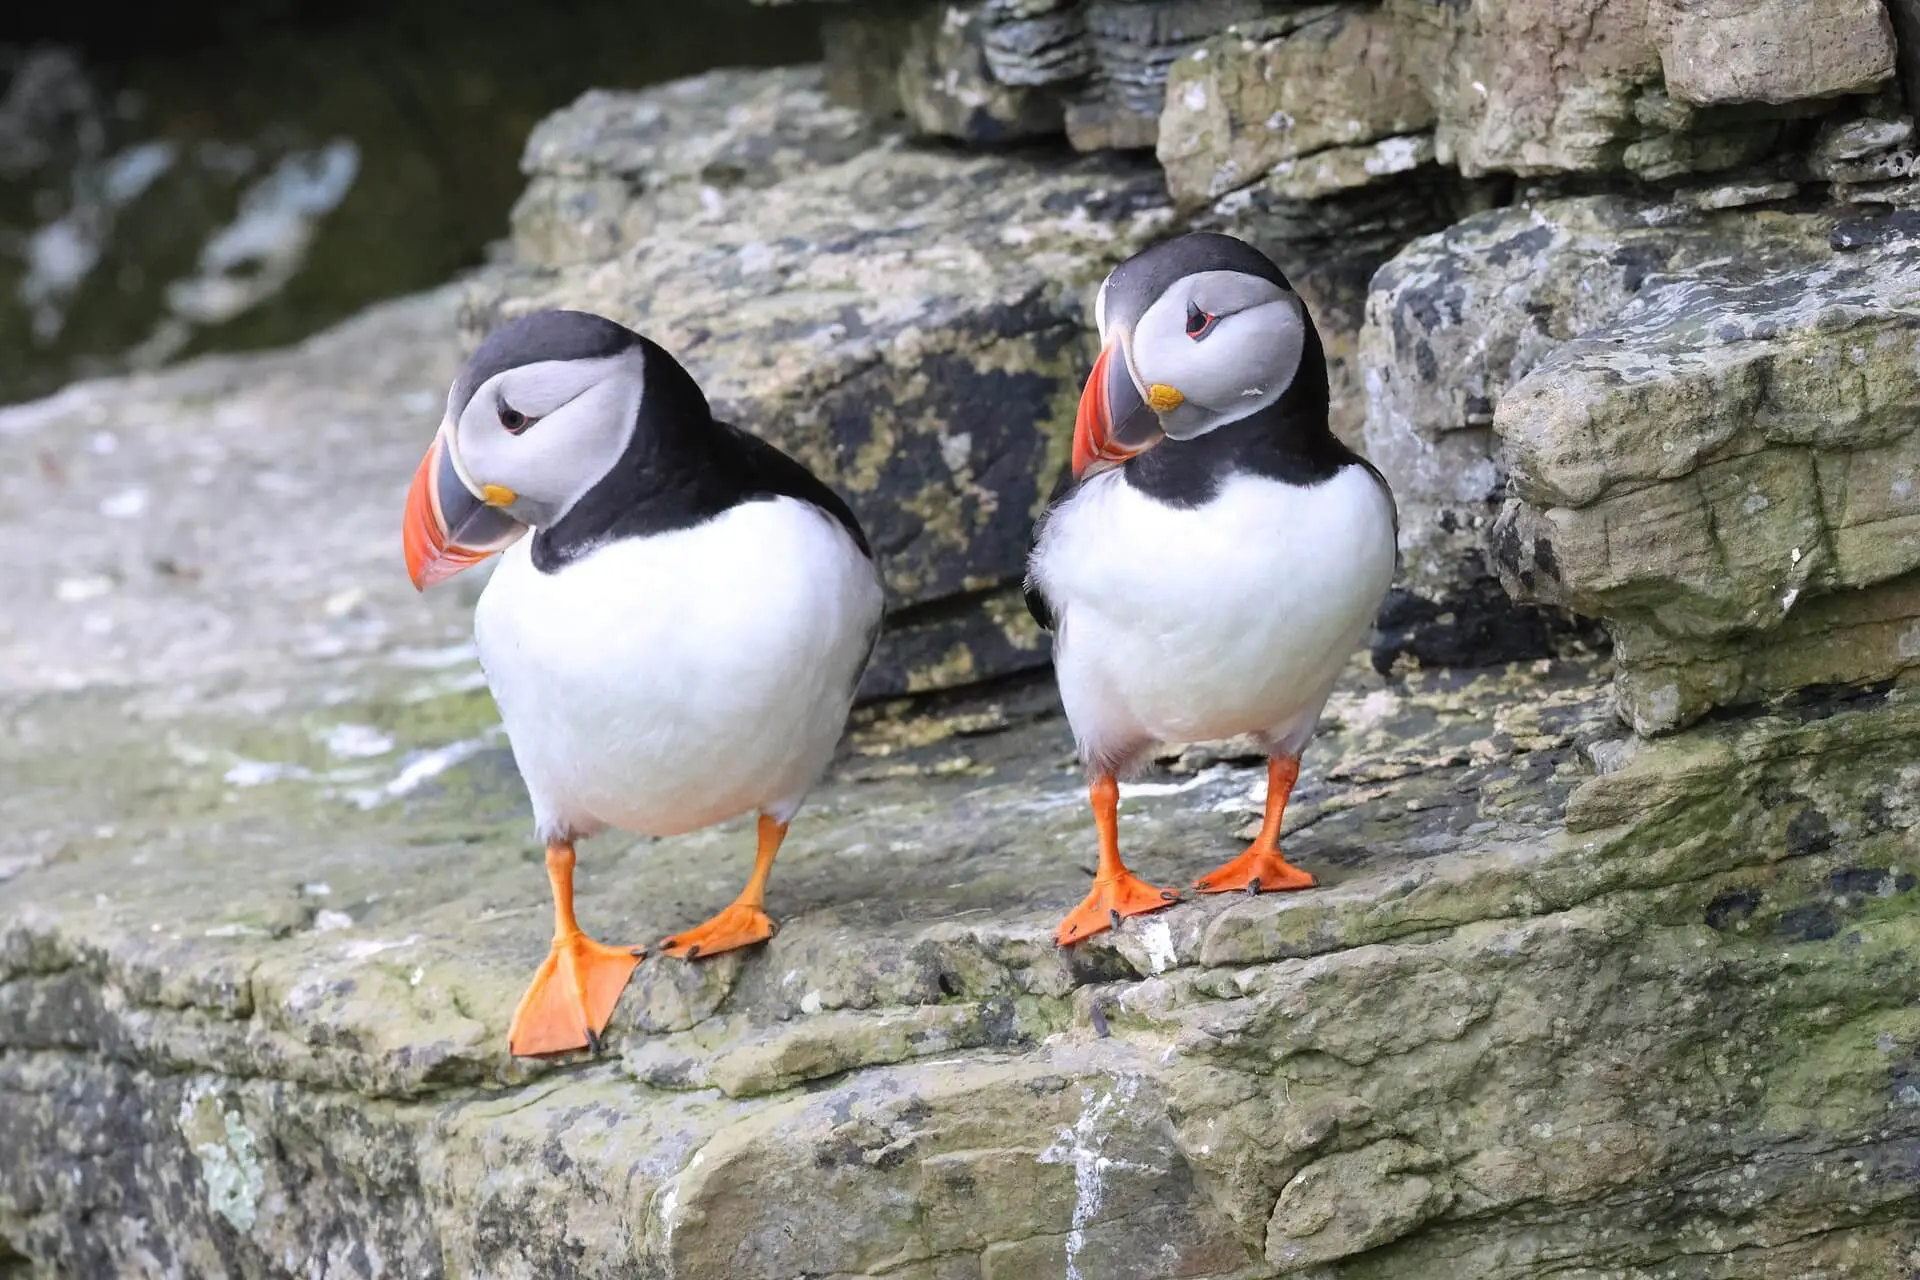 A close up of two puffins